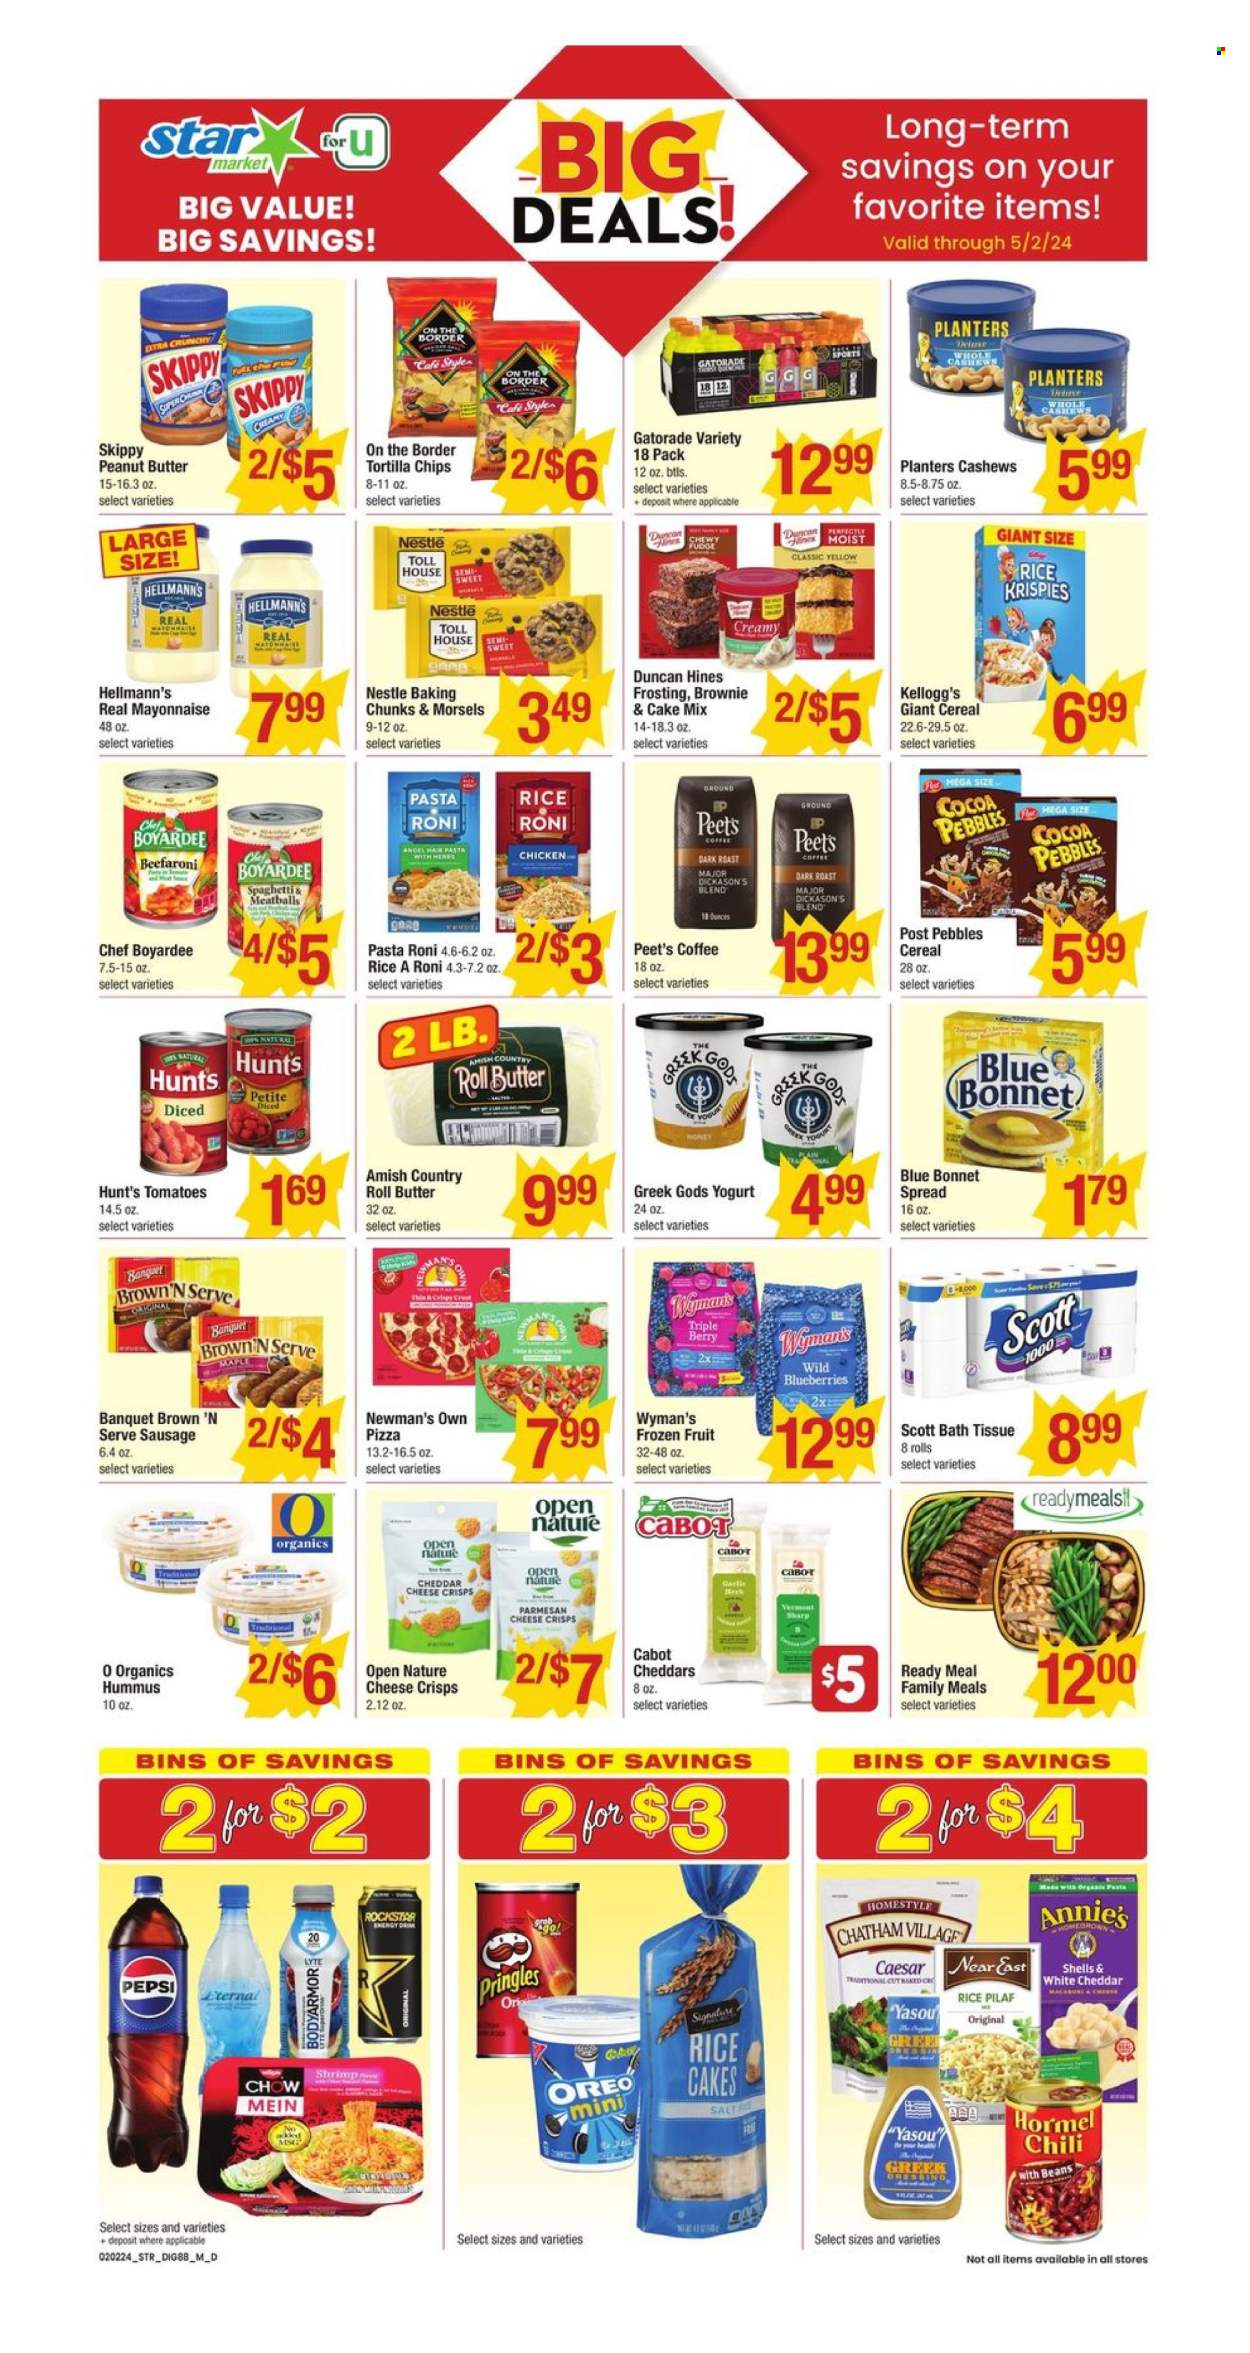 thumbnail - Star Market Flyer - 02/02/2024 - 05/02/2024 - Sales products - Brown 'N Serve, rice cakes, cake mix, blueberries, shrimps, spaghetti, pizza, meatballs, pasta, Annie's, pasta sides, Hormel, ready meal, rice sides, sausage, cheddar, parmesan, greek yoghurt, Oreo, yoghurt, margarine, mayonnaise, Hellmann’s, frozen fruit, Nestlé, Kellogg's, tortilla chips, Pringles, chips, crisps, frosting, baking mix, canned tomatoes, Chef Boyardee, Rice Krispies, peanut butter, cashews, Planters, Pepsi, energy drink, soft drink, Gatorade, electrolyte drink, carbonated soft drink, coffee, chicken. Page 1.